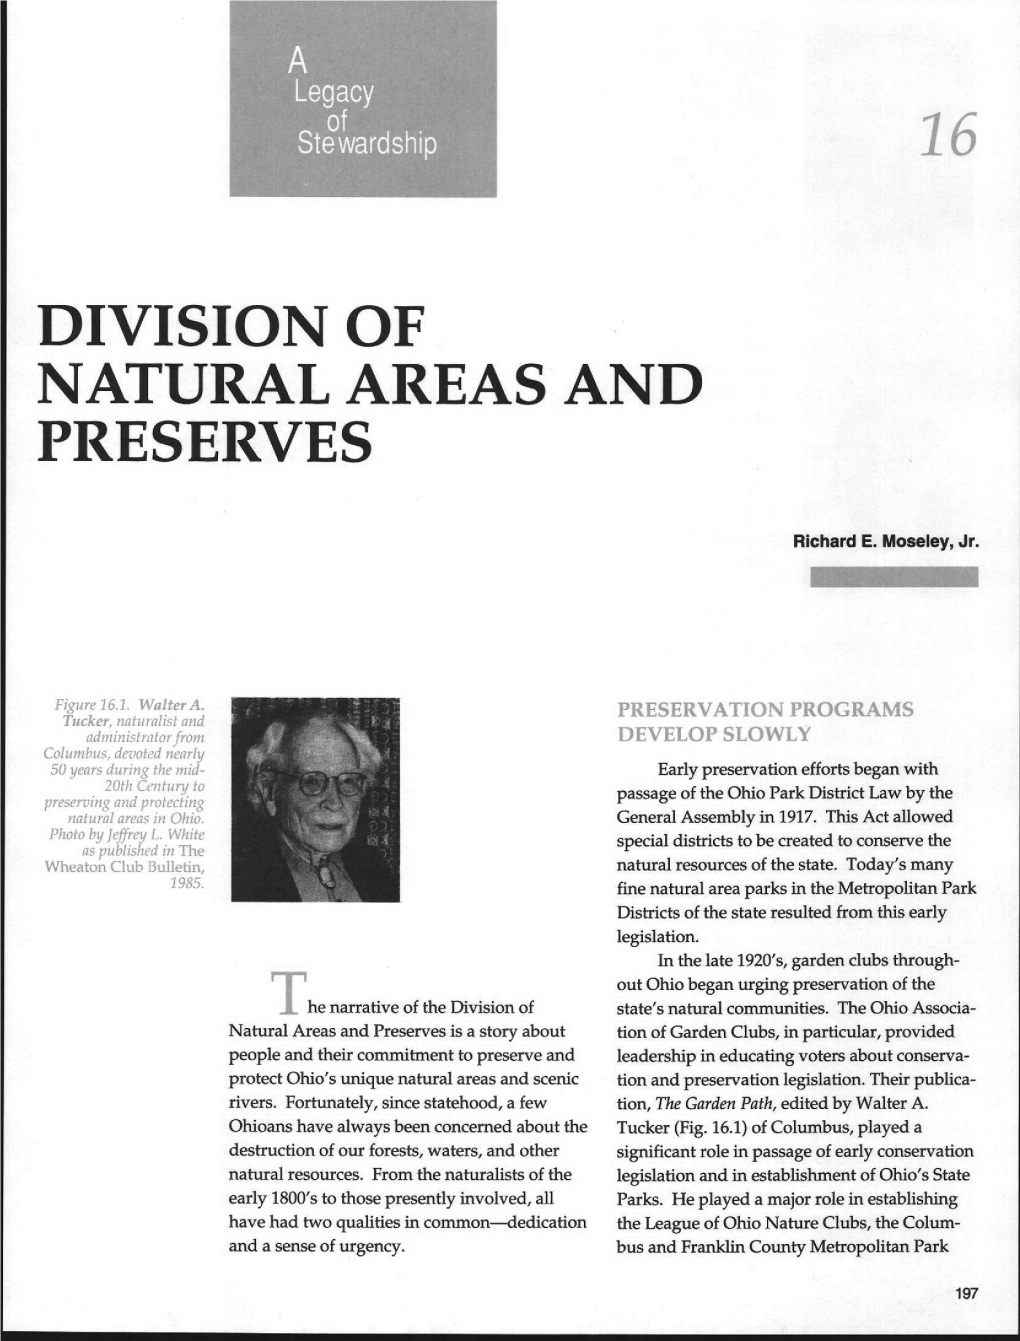 Division of Natural Areas and Preserves